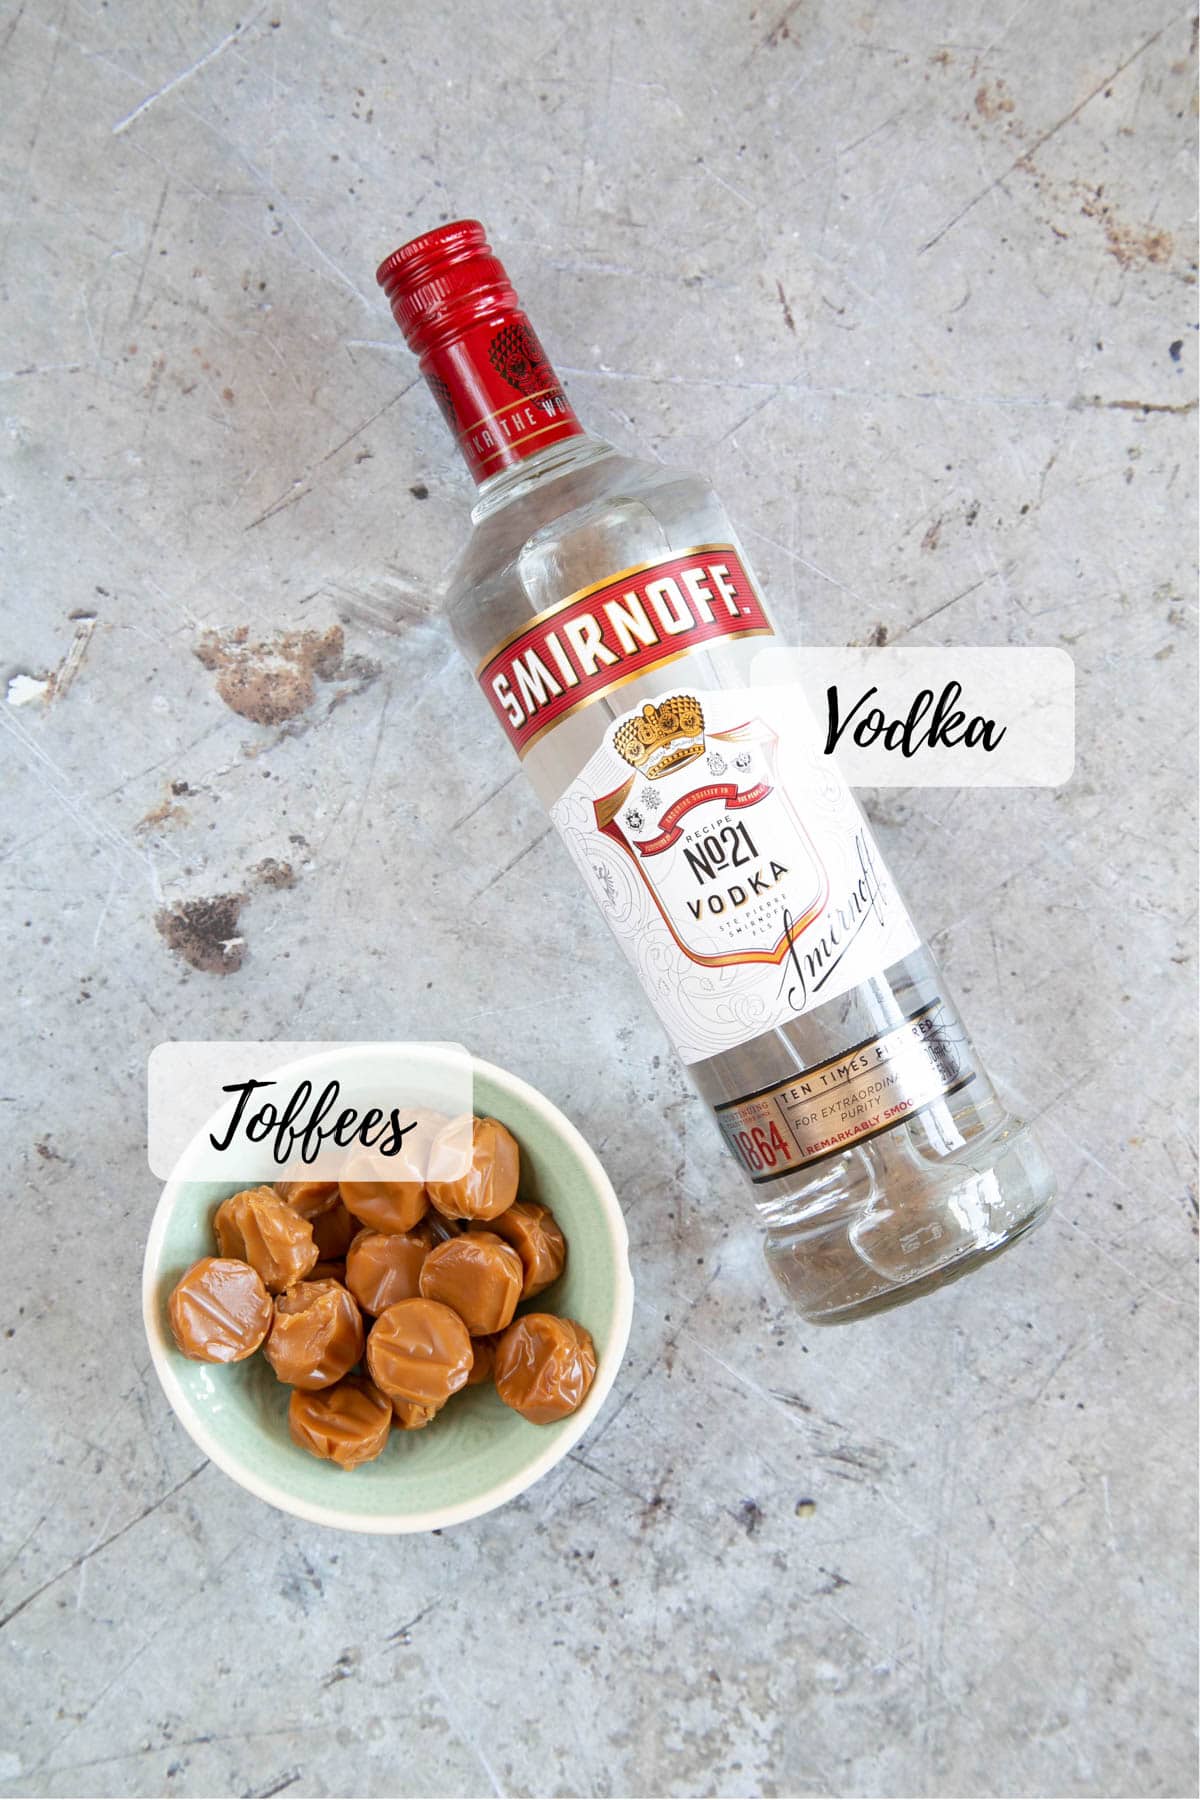 The ingredients for toffee vodka - just a bottle of vodka and a handful of toffees!